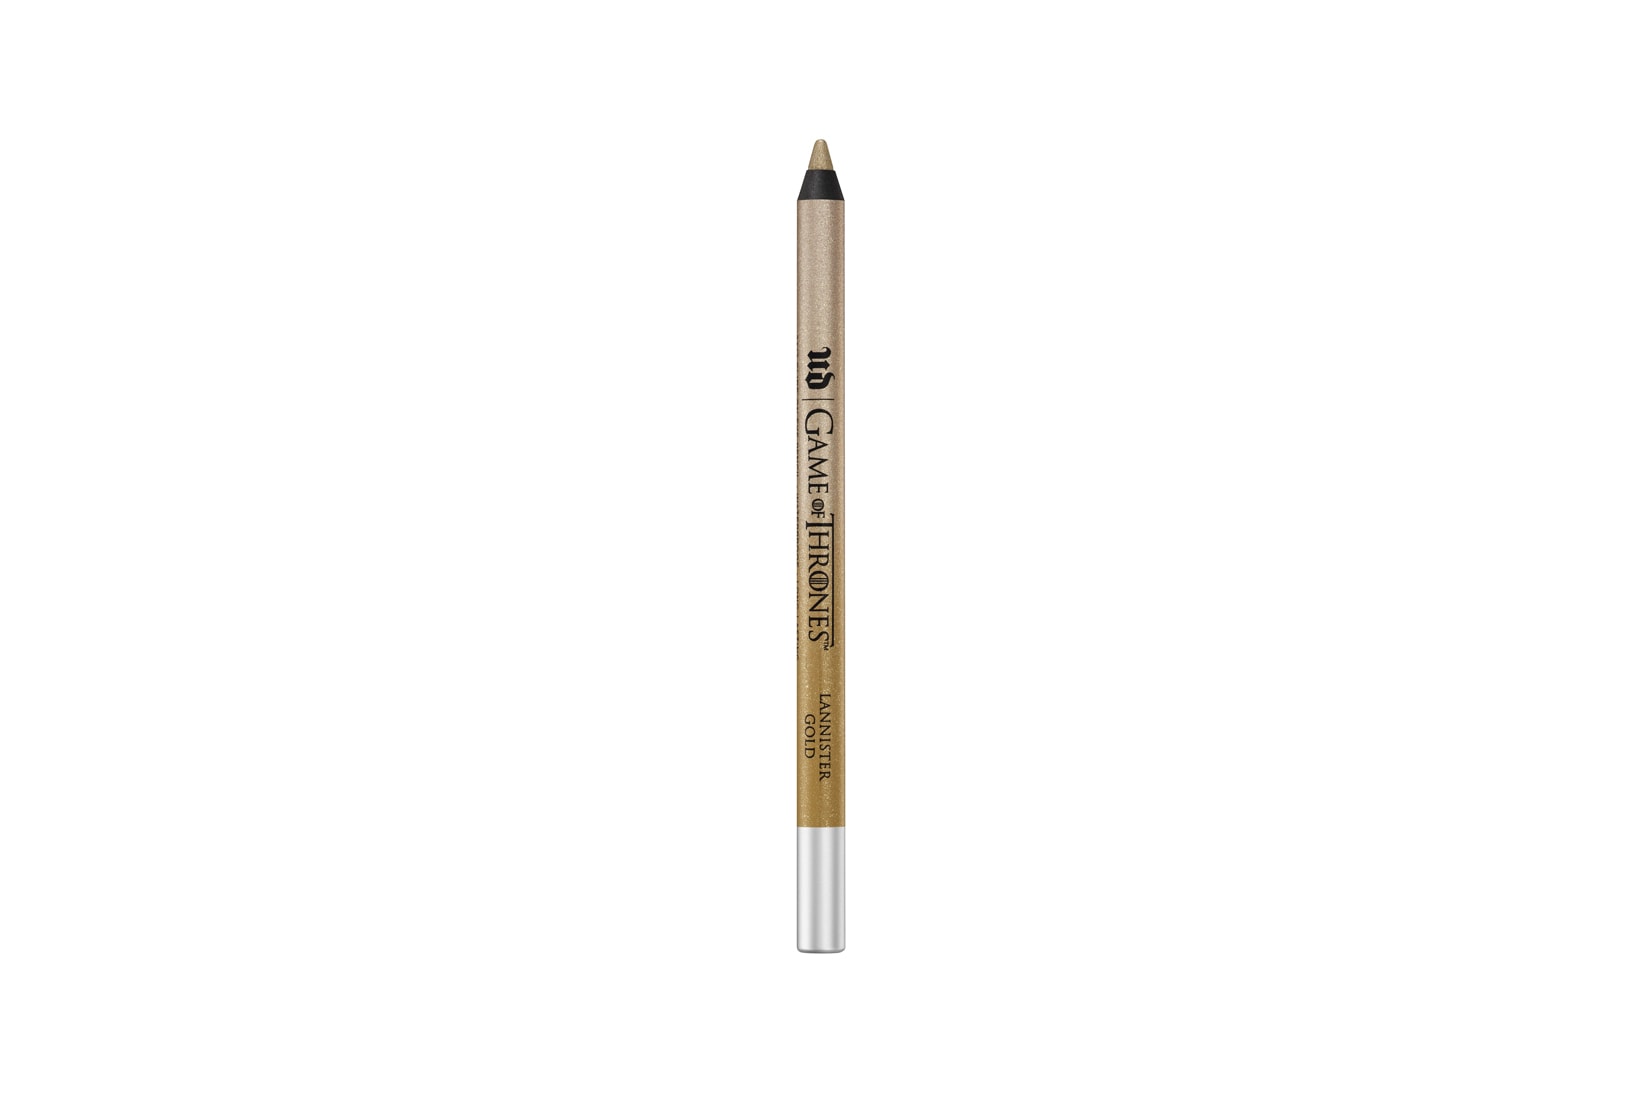 Game of Thrones x Urban Decay Makeup Collection Glide-On Eye Pencil Lanister Gold